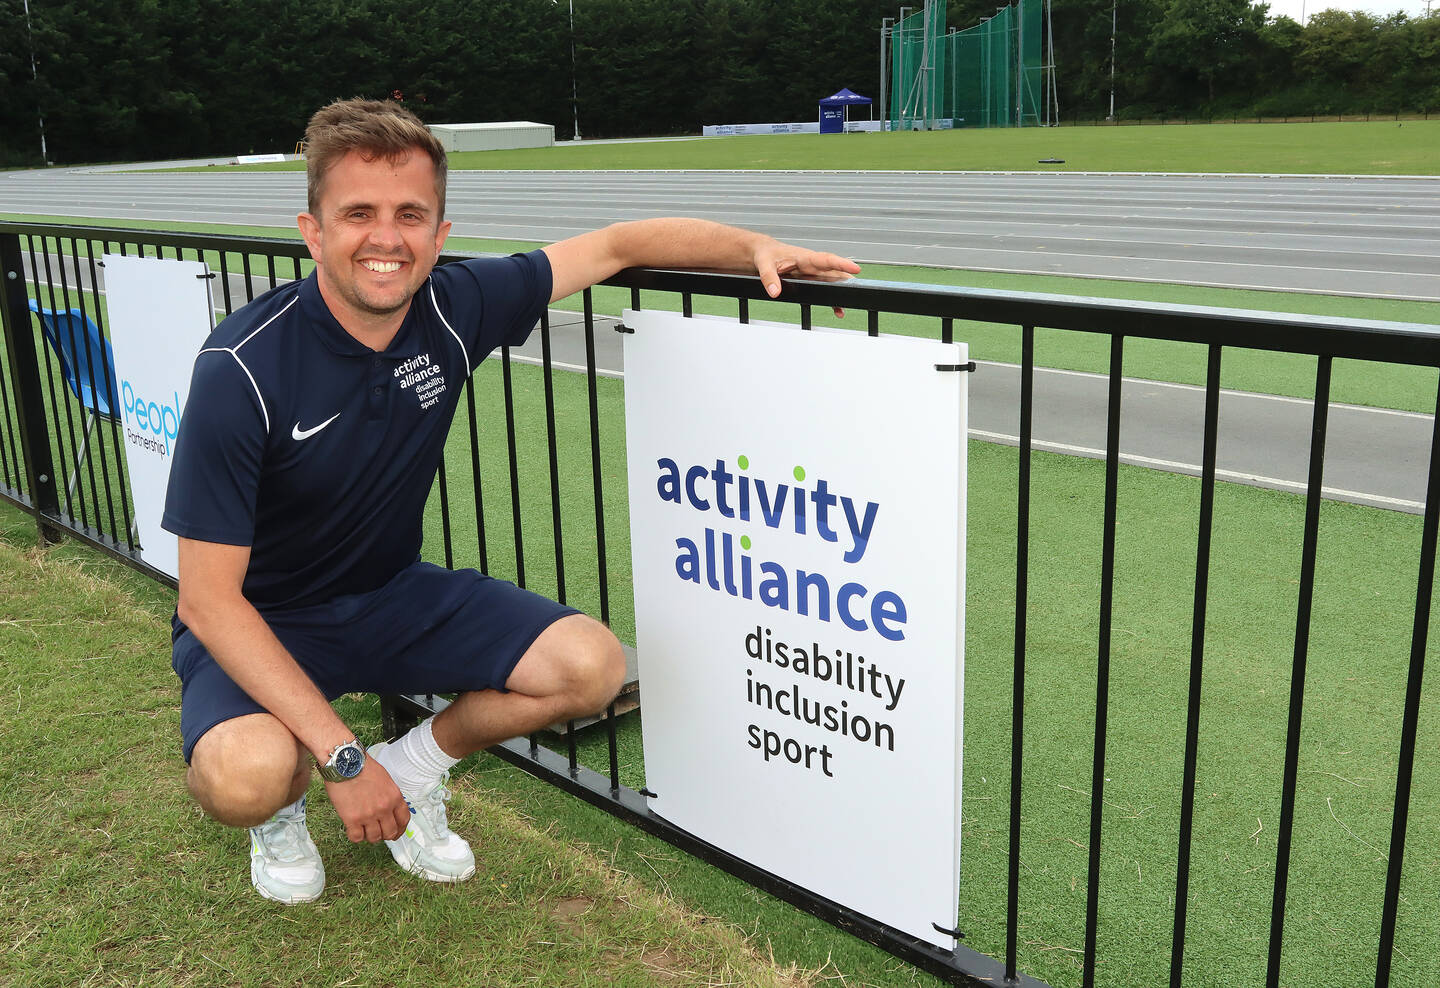 Adam Blaze, CEO of Activity Alliance, crouches next to the Activity Alliance logo on a board.